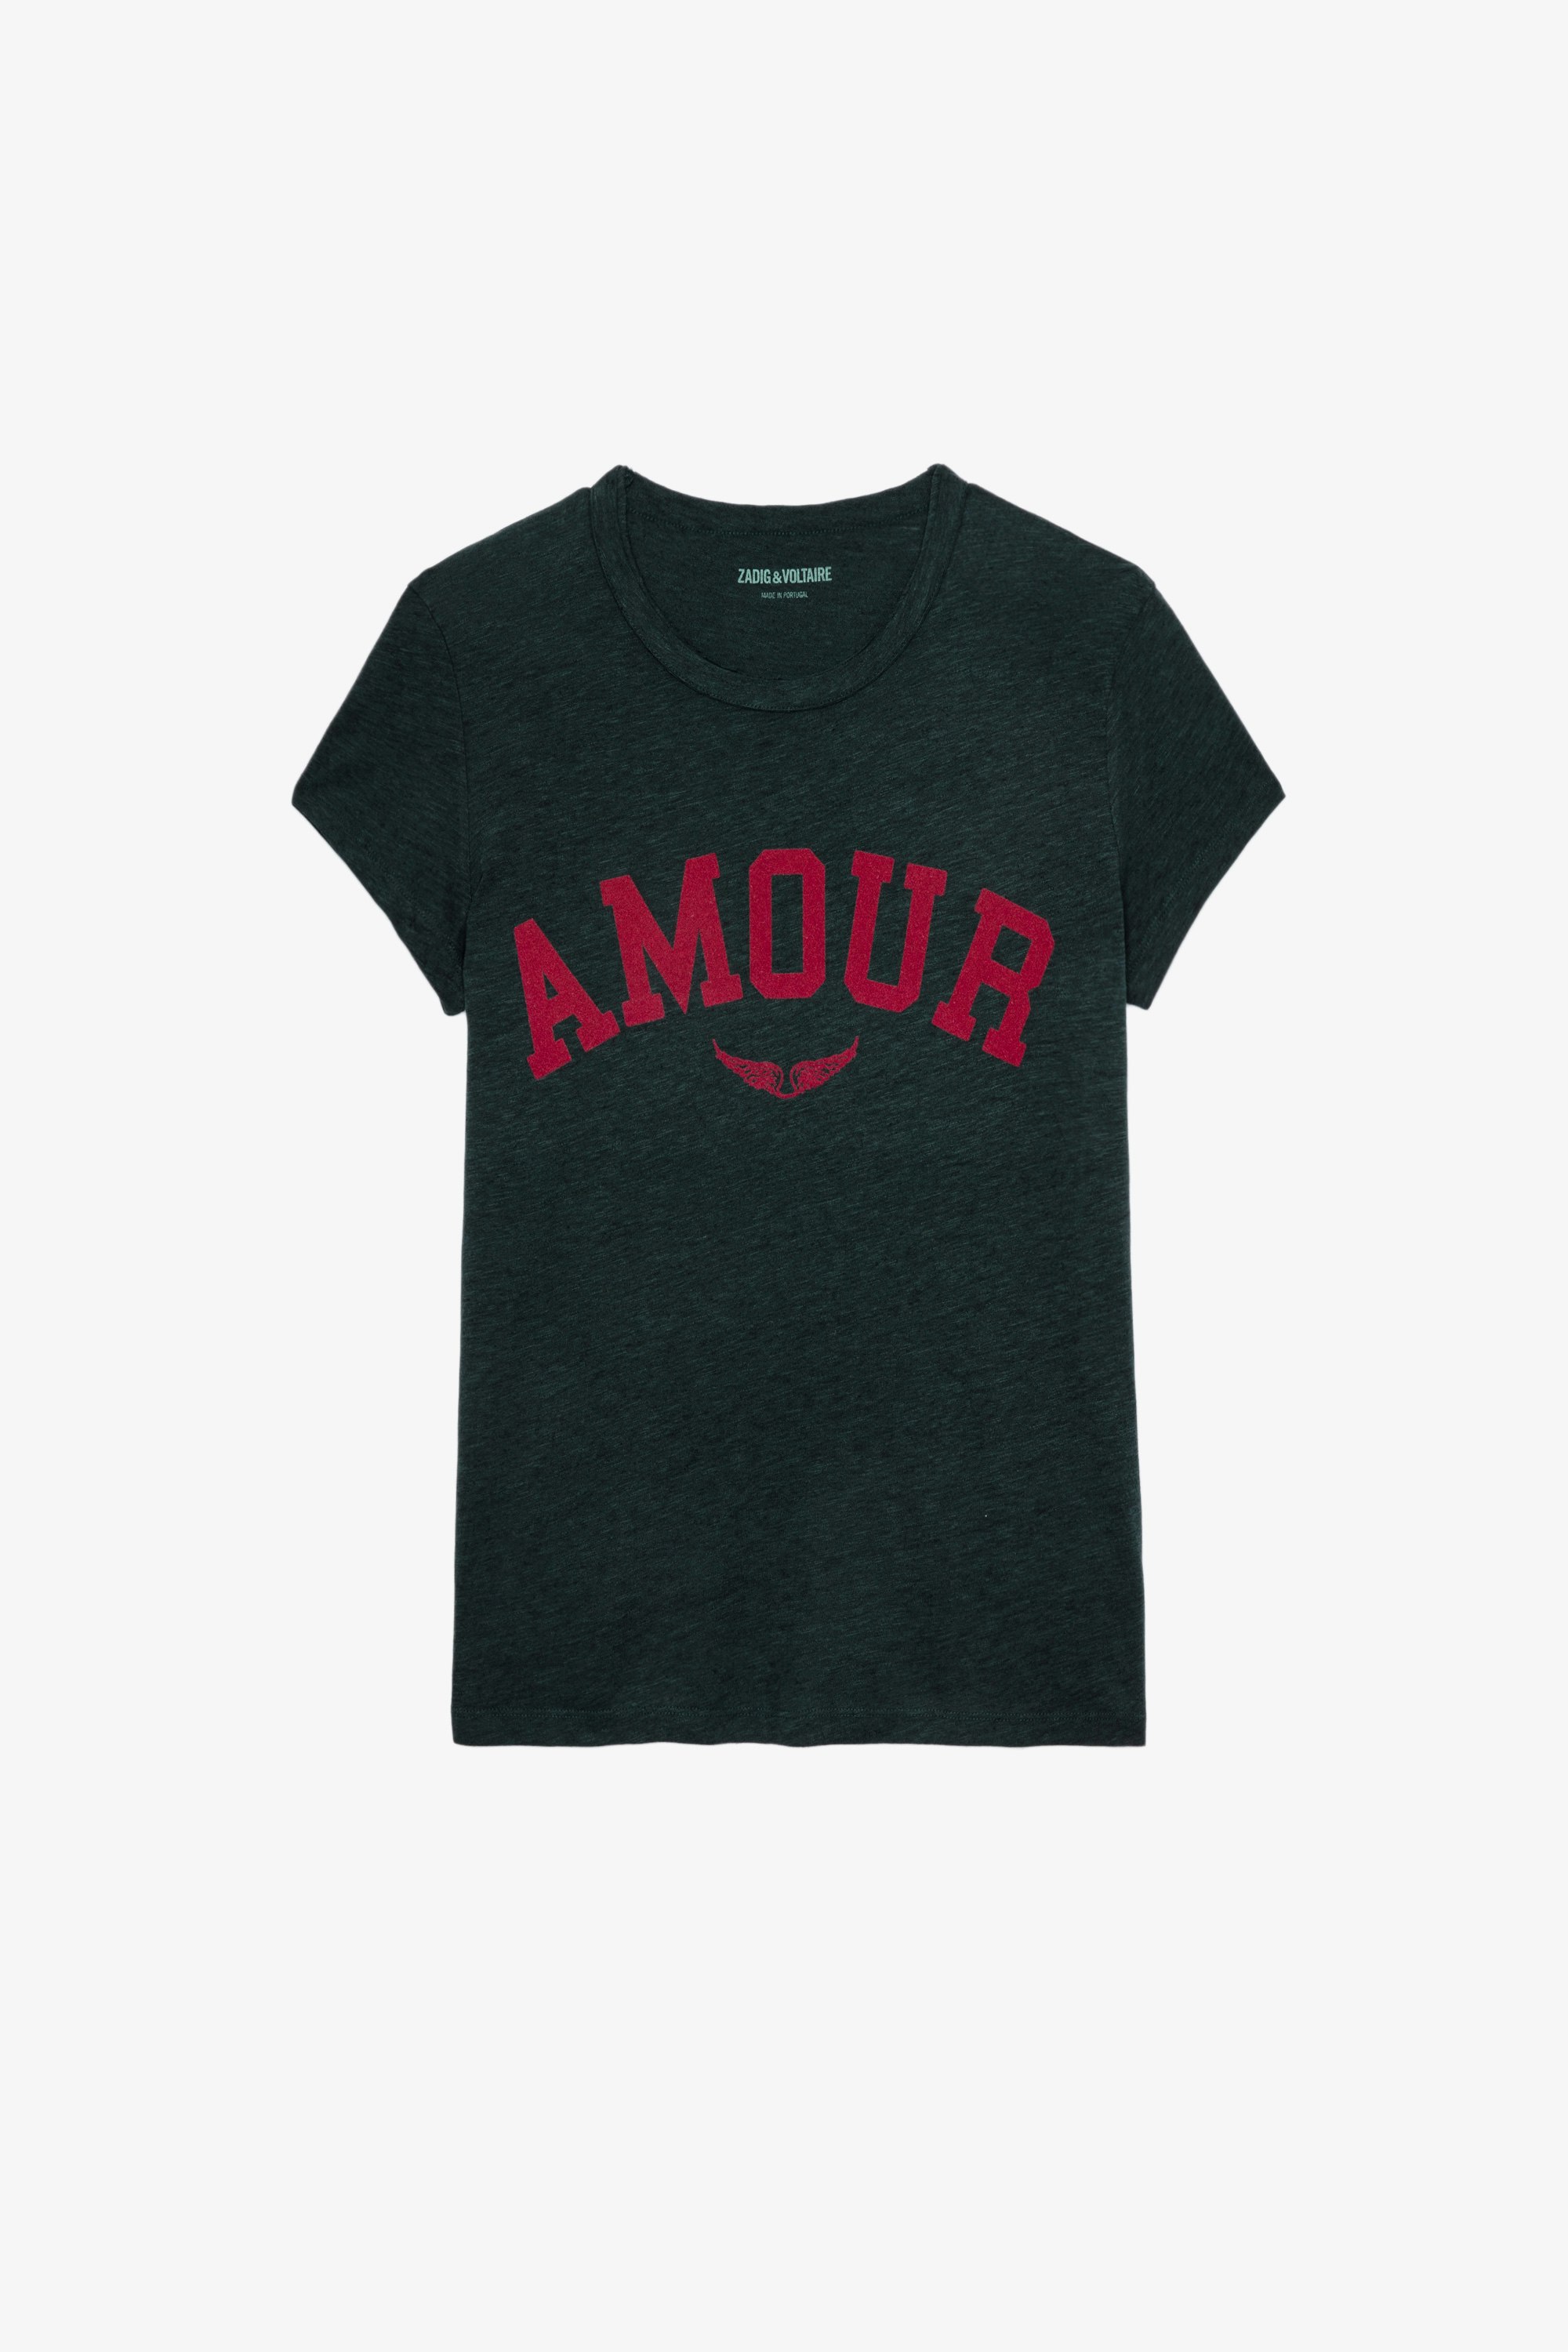 Walk Amour Ｔシャツ Women’s Amour green round-neck short-sleeved T-shirt